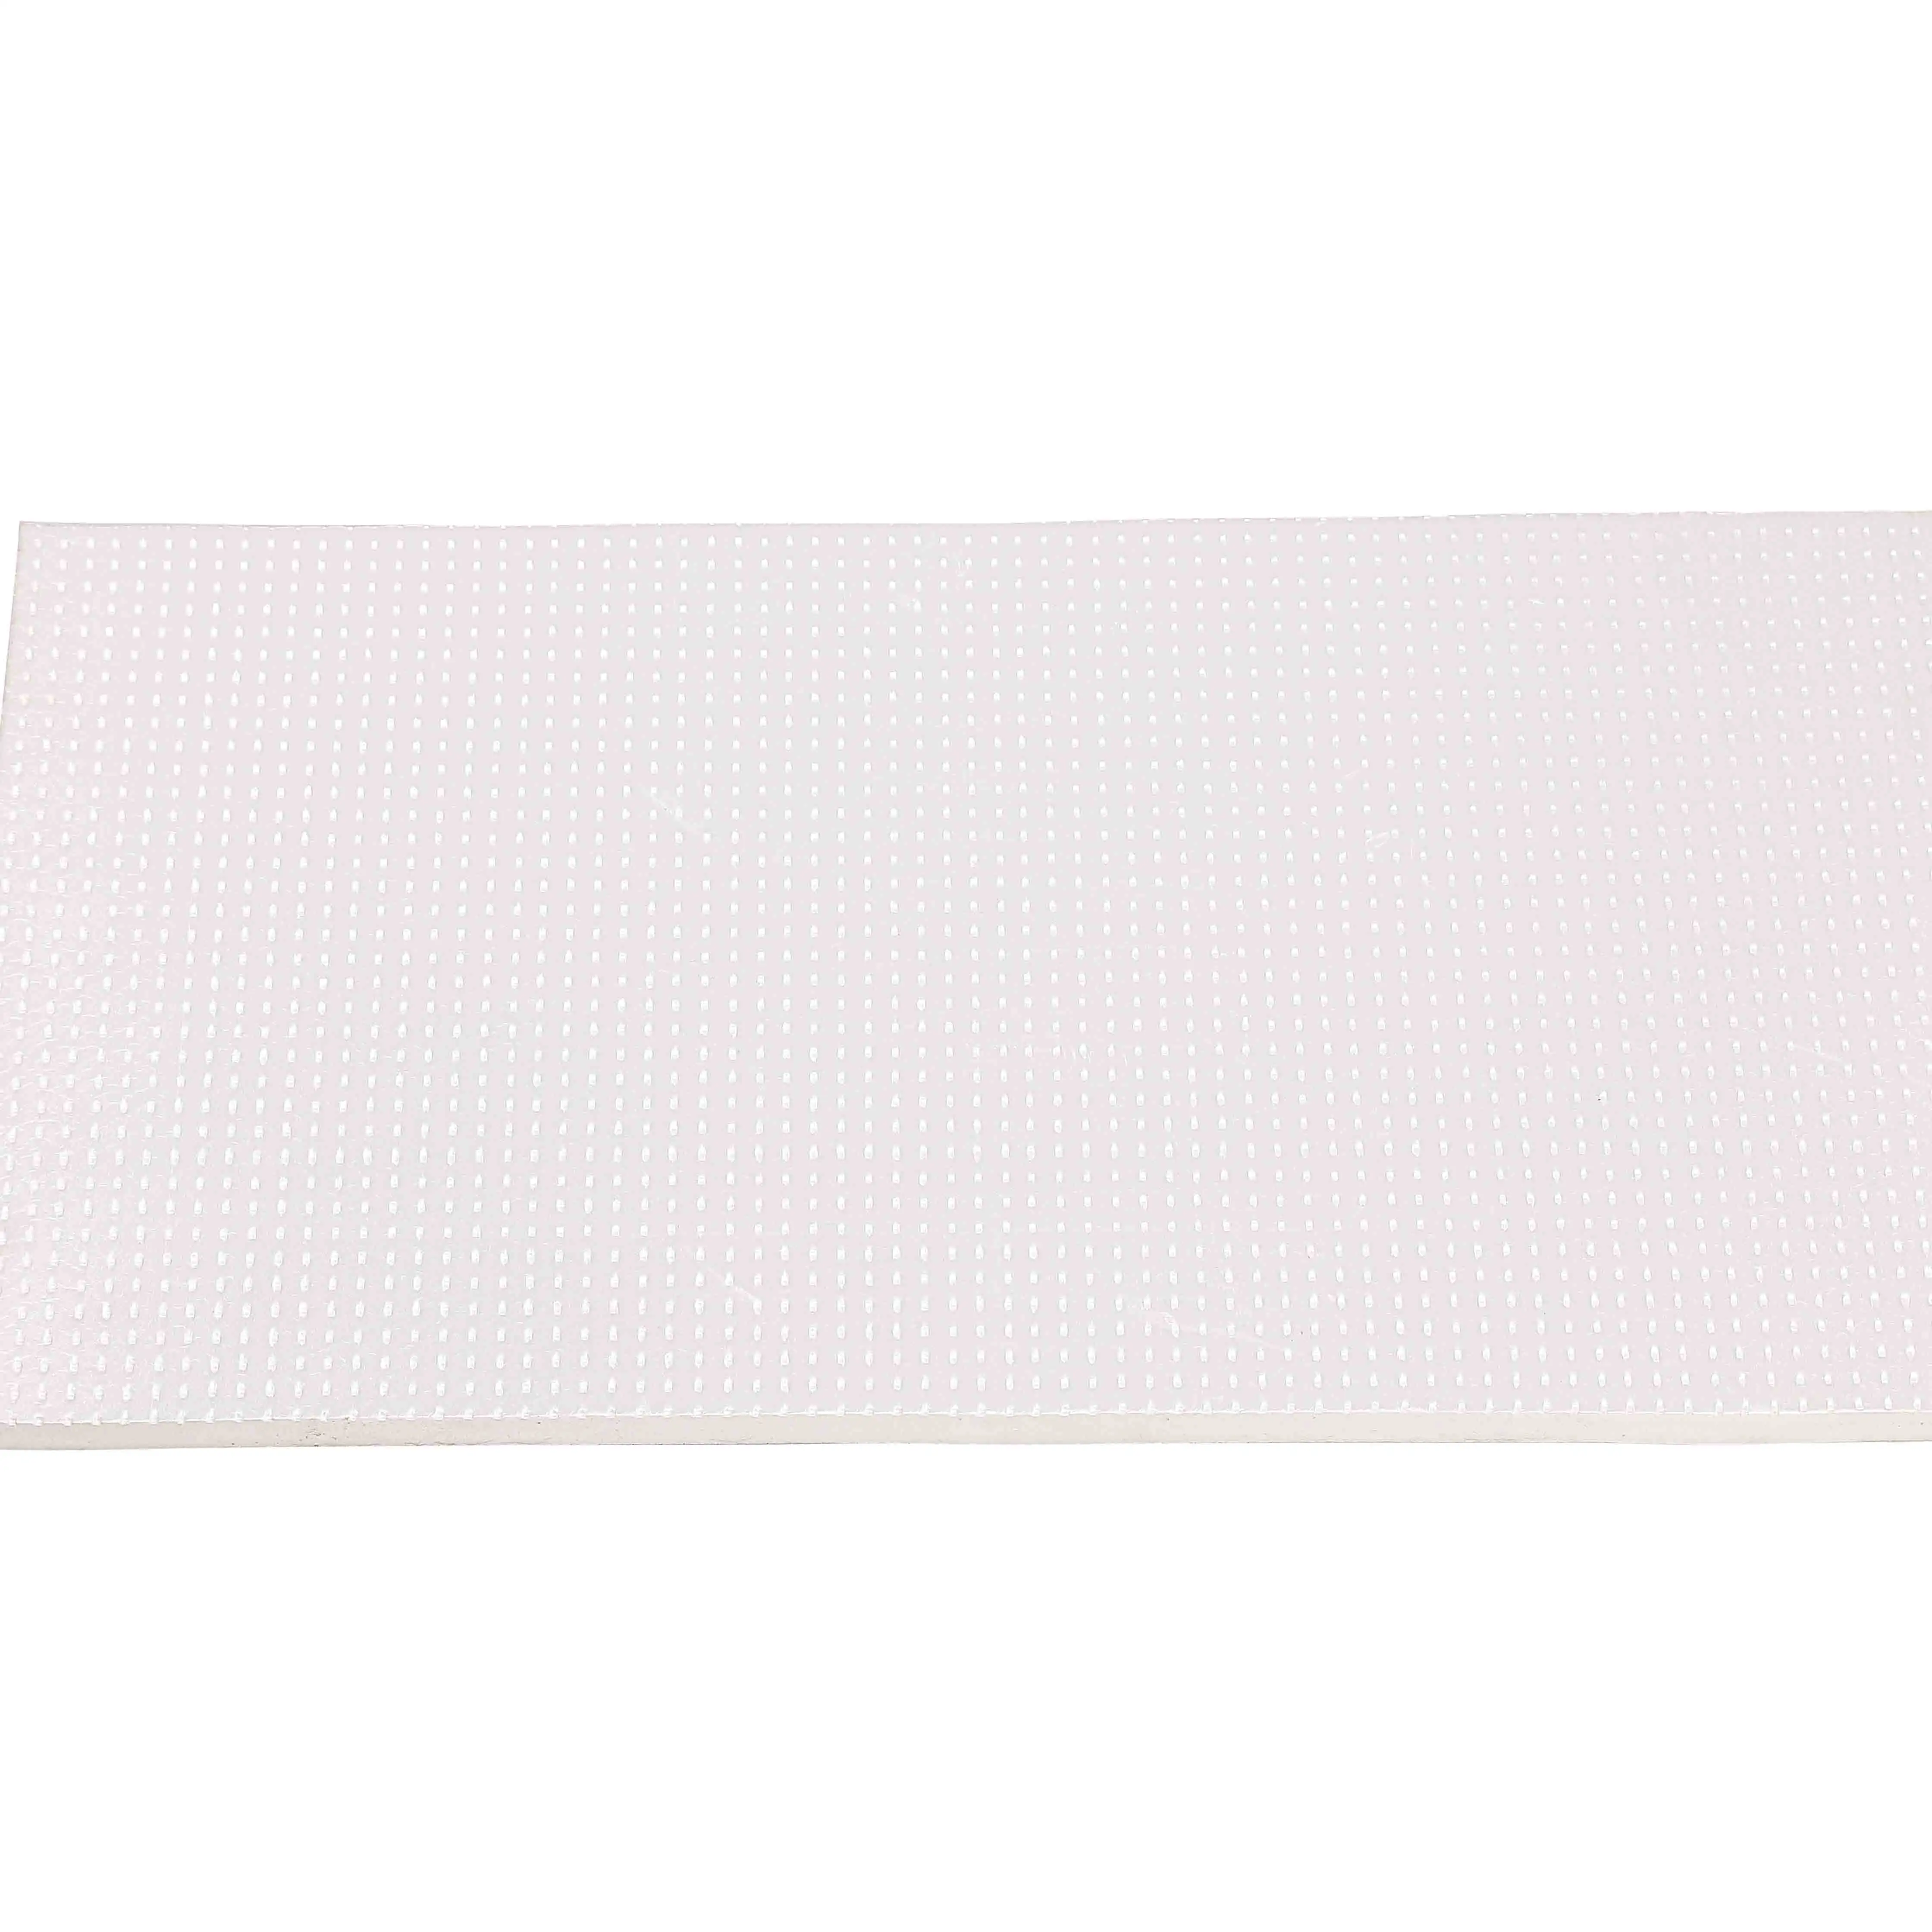 Xps Foam Insulation Board Floor And Drain System Grooved Heating Foam Xps 5mm Laminate Flooring Underlay Grooves Insulation Eco Heat Board